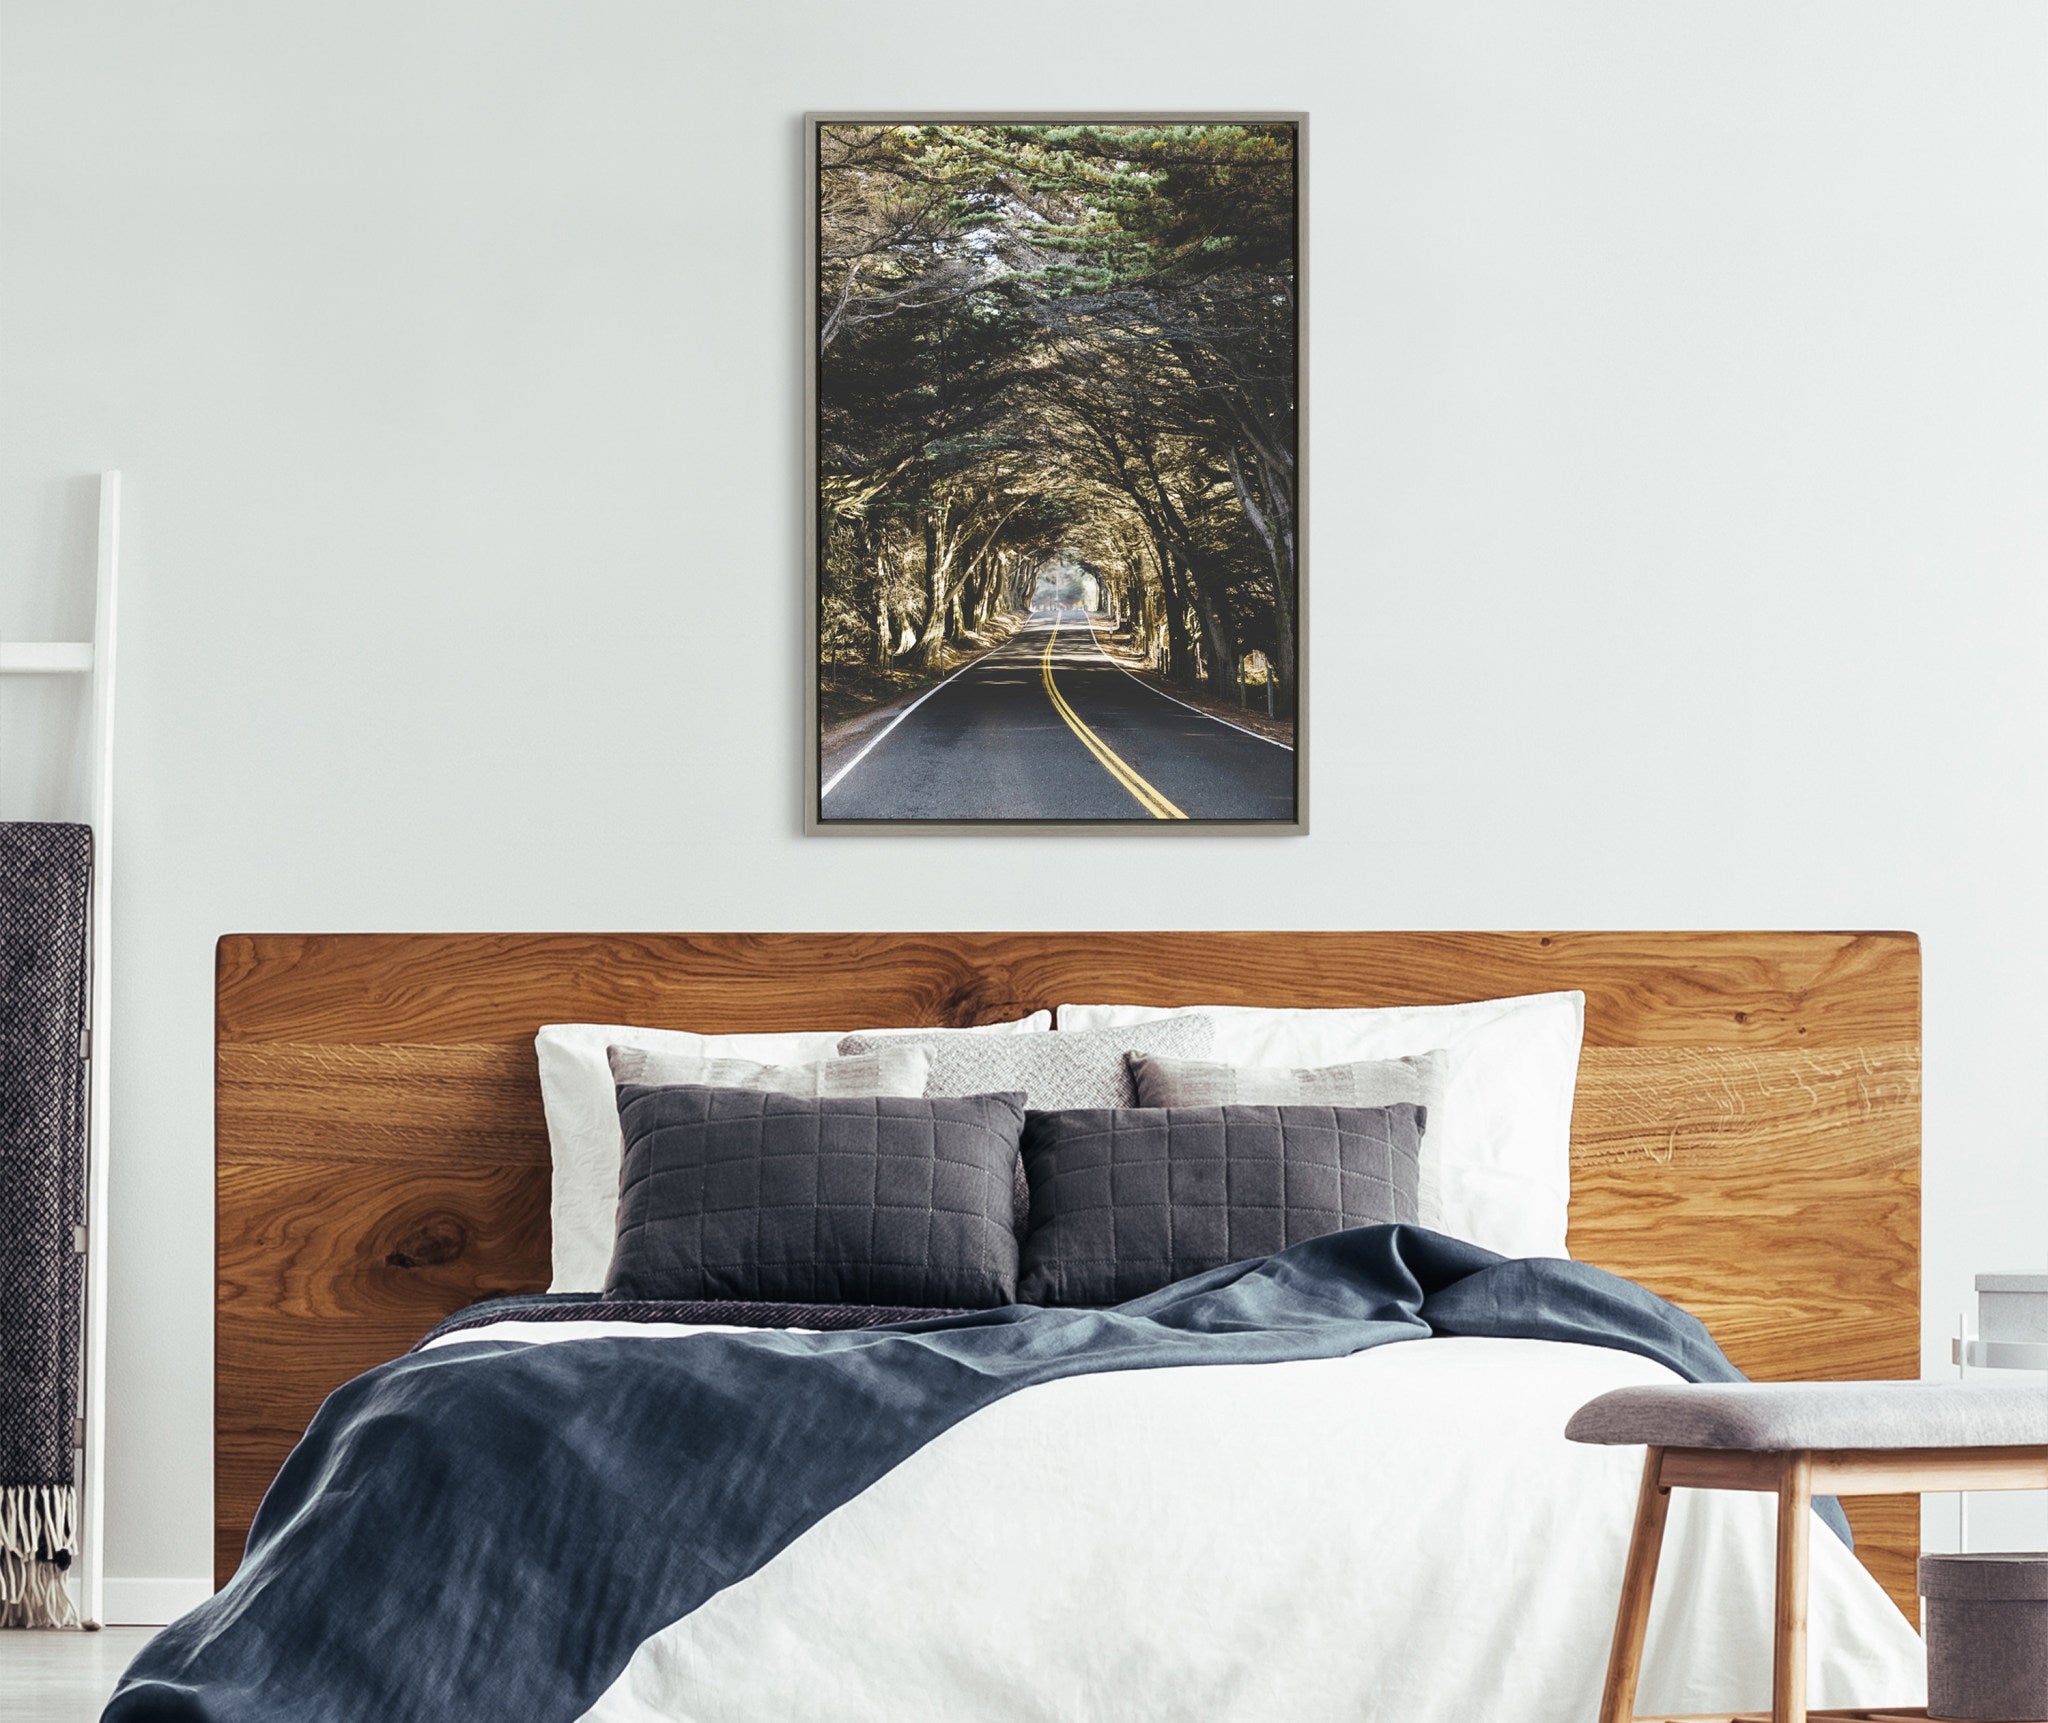 Sylvie Road Tripping Framed Canvas by Patricia Hasz of Patricia Rae Photography